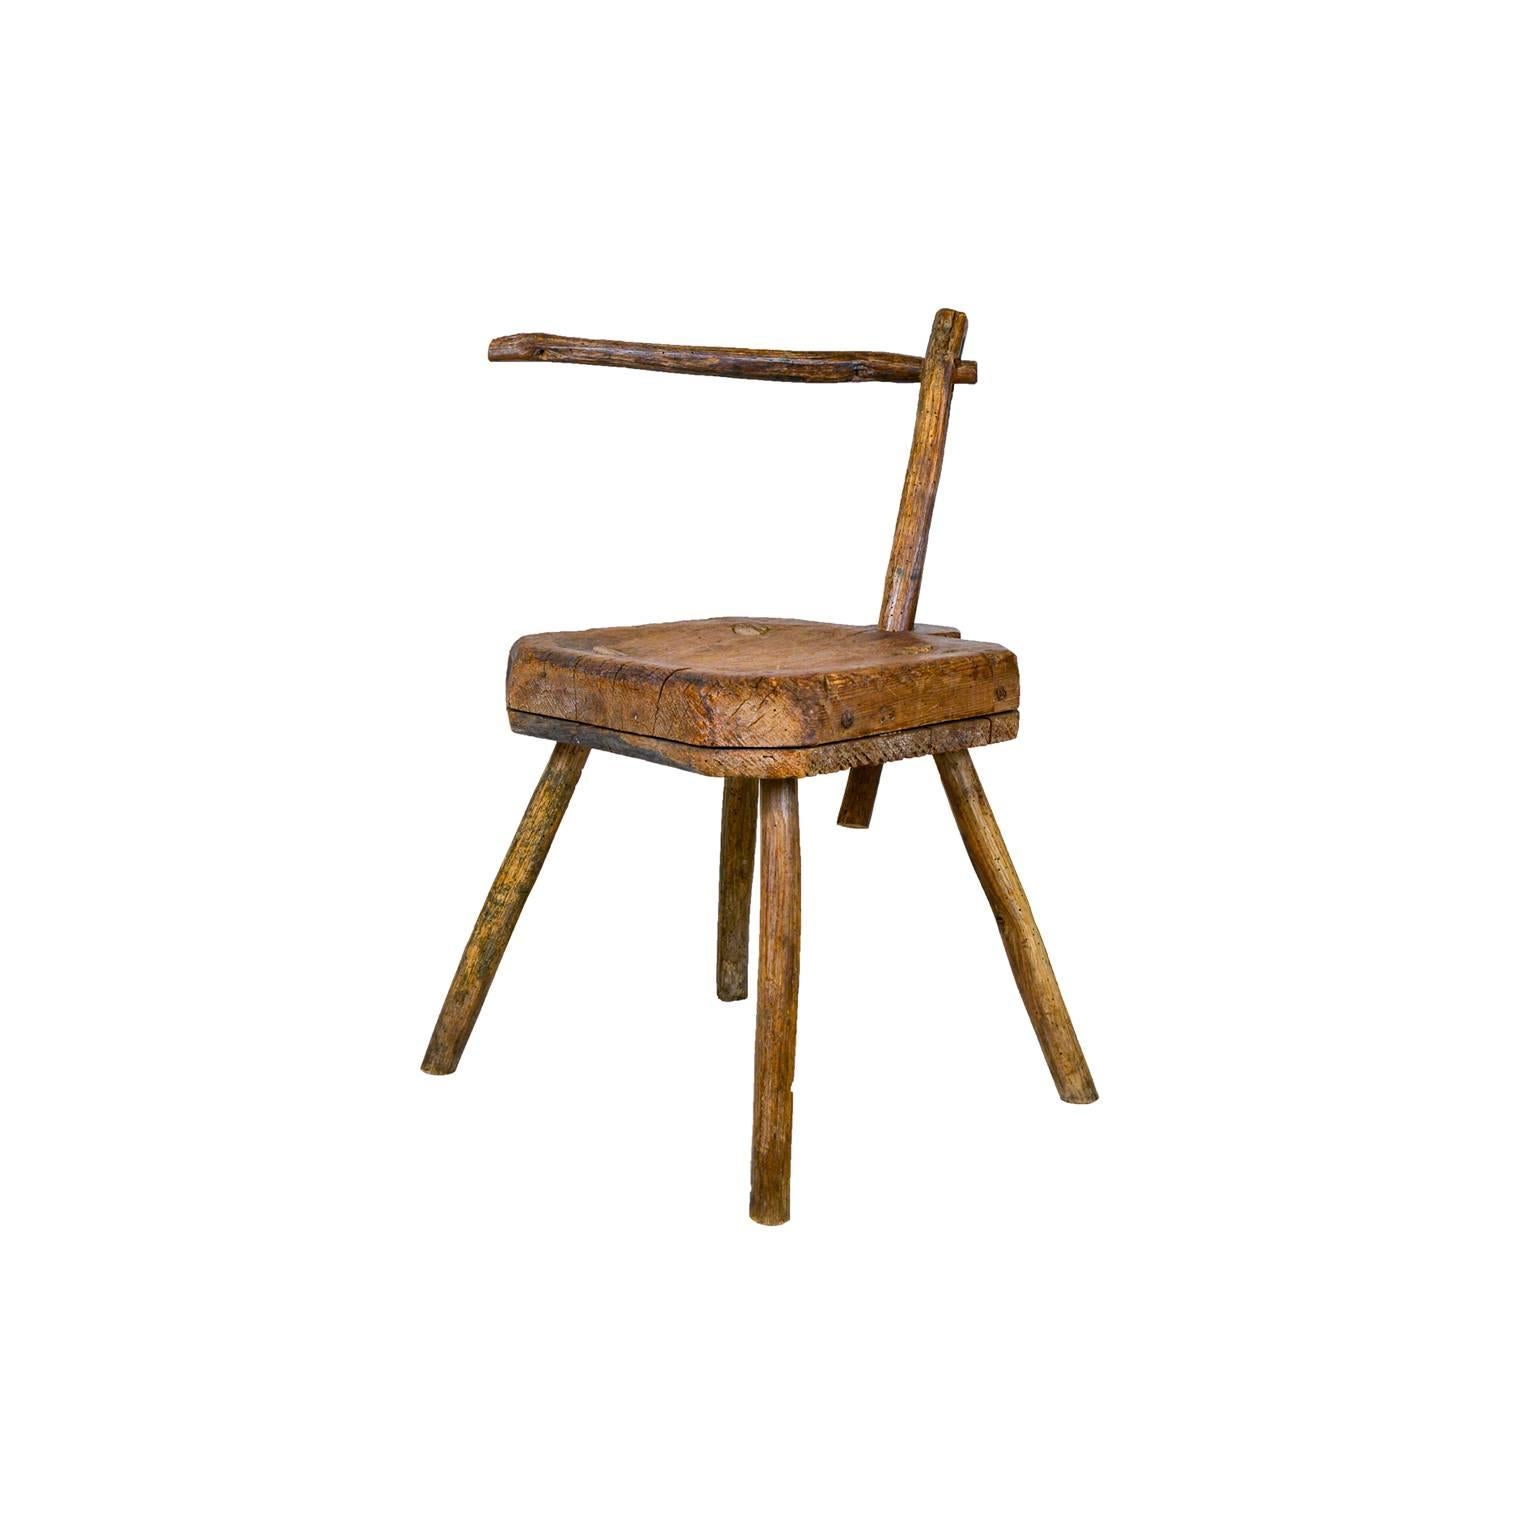 Hand-whittled wooden midwife stool from 19th century. The pivoting arm was used to drape cloths to assist the midwife. 

         